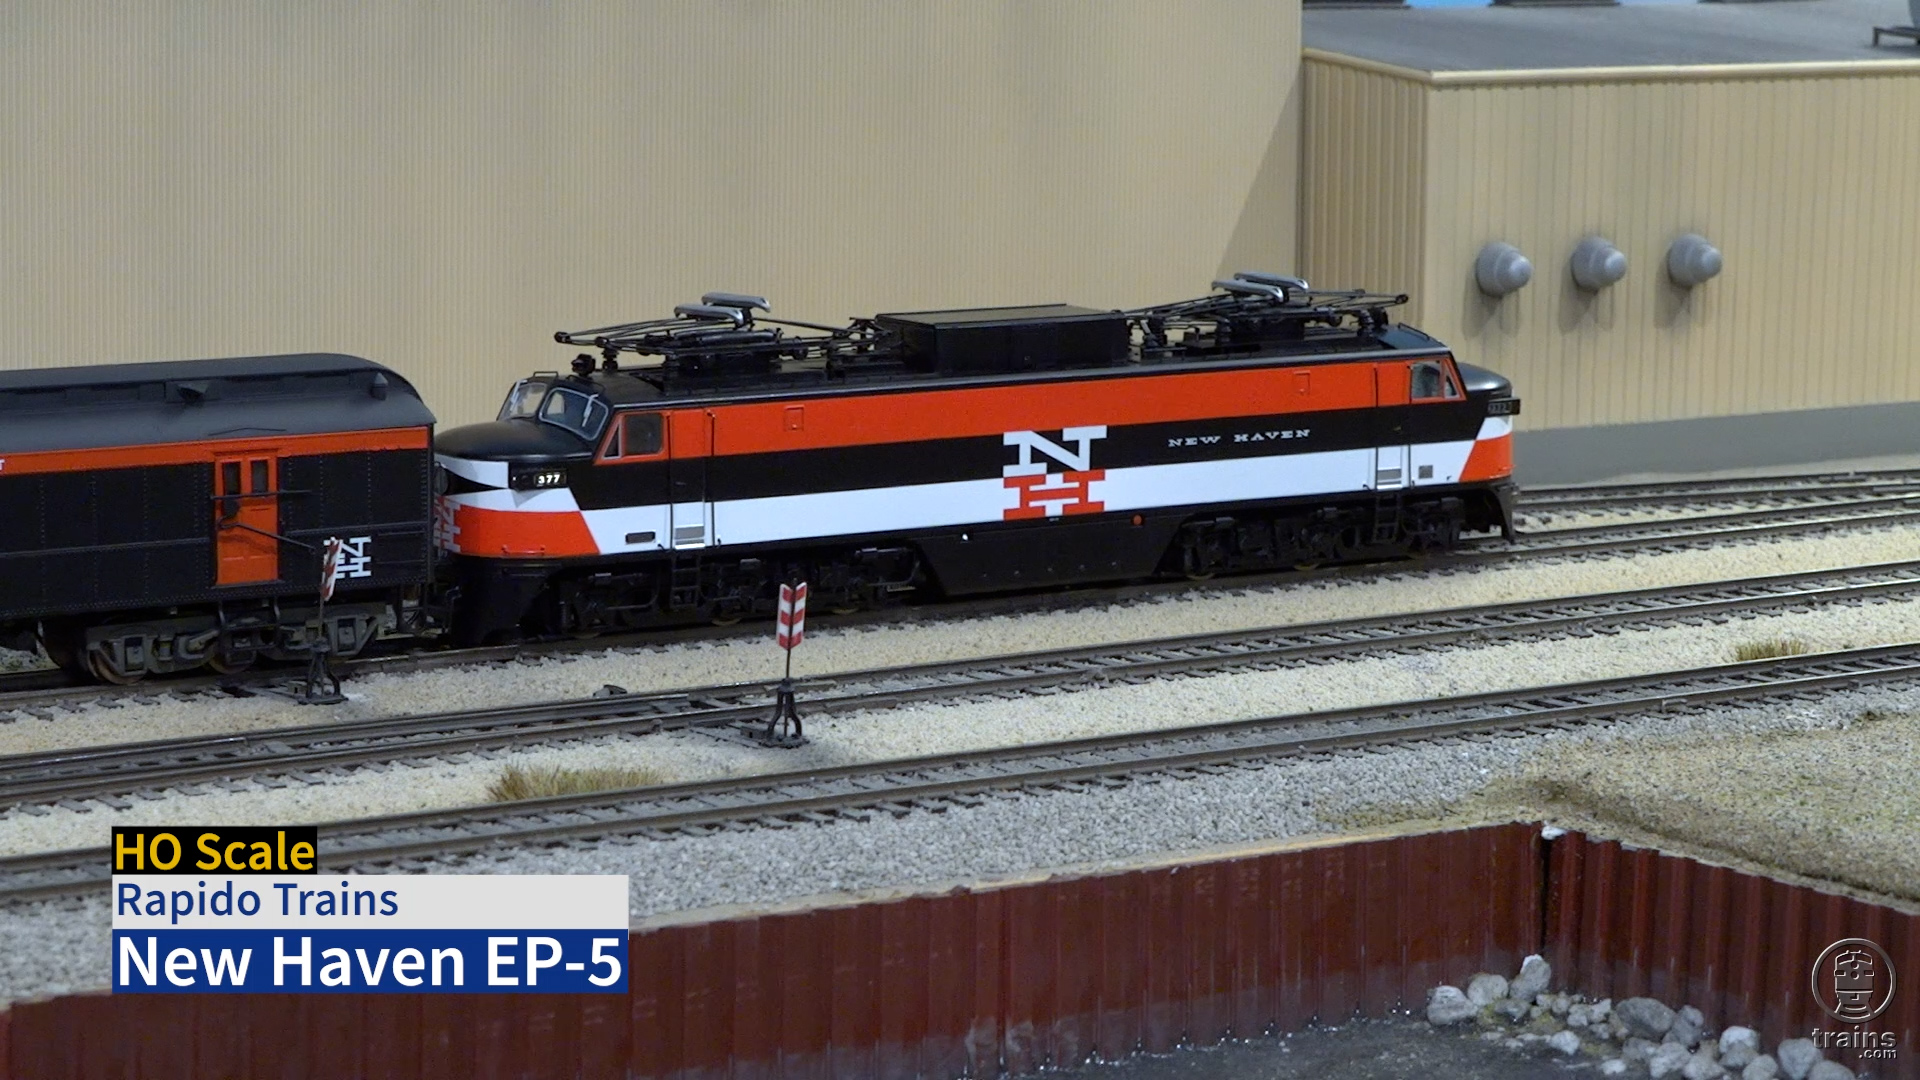 Rapido Trains HO scale New Haven EP-5 electric